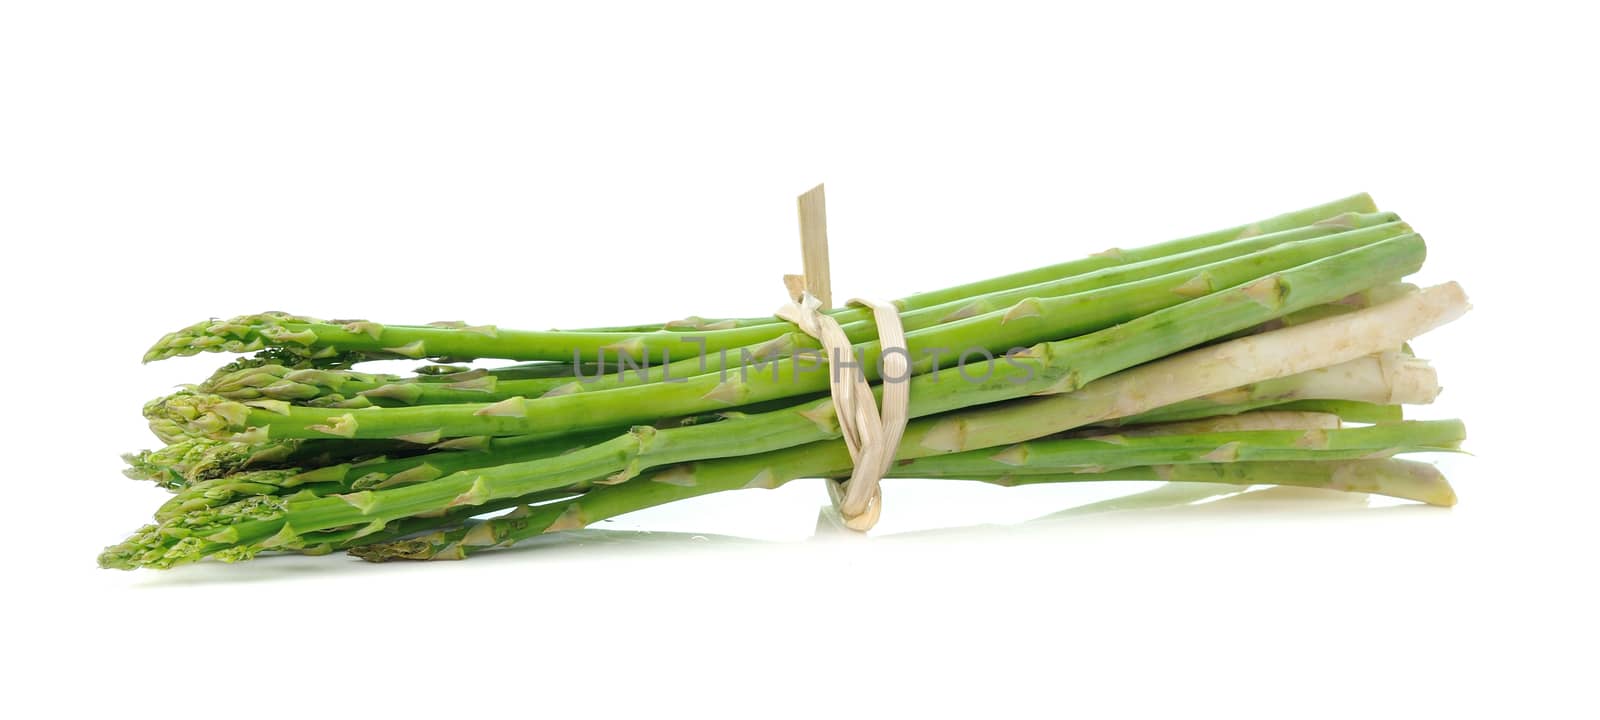 Asparagus isolated on white background  by sommai